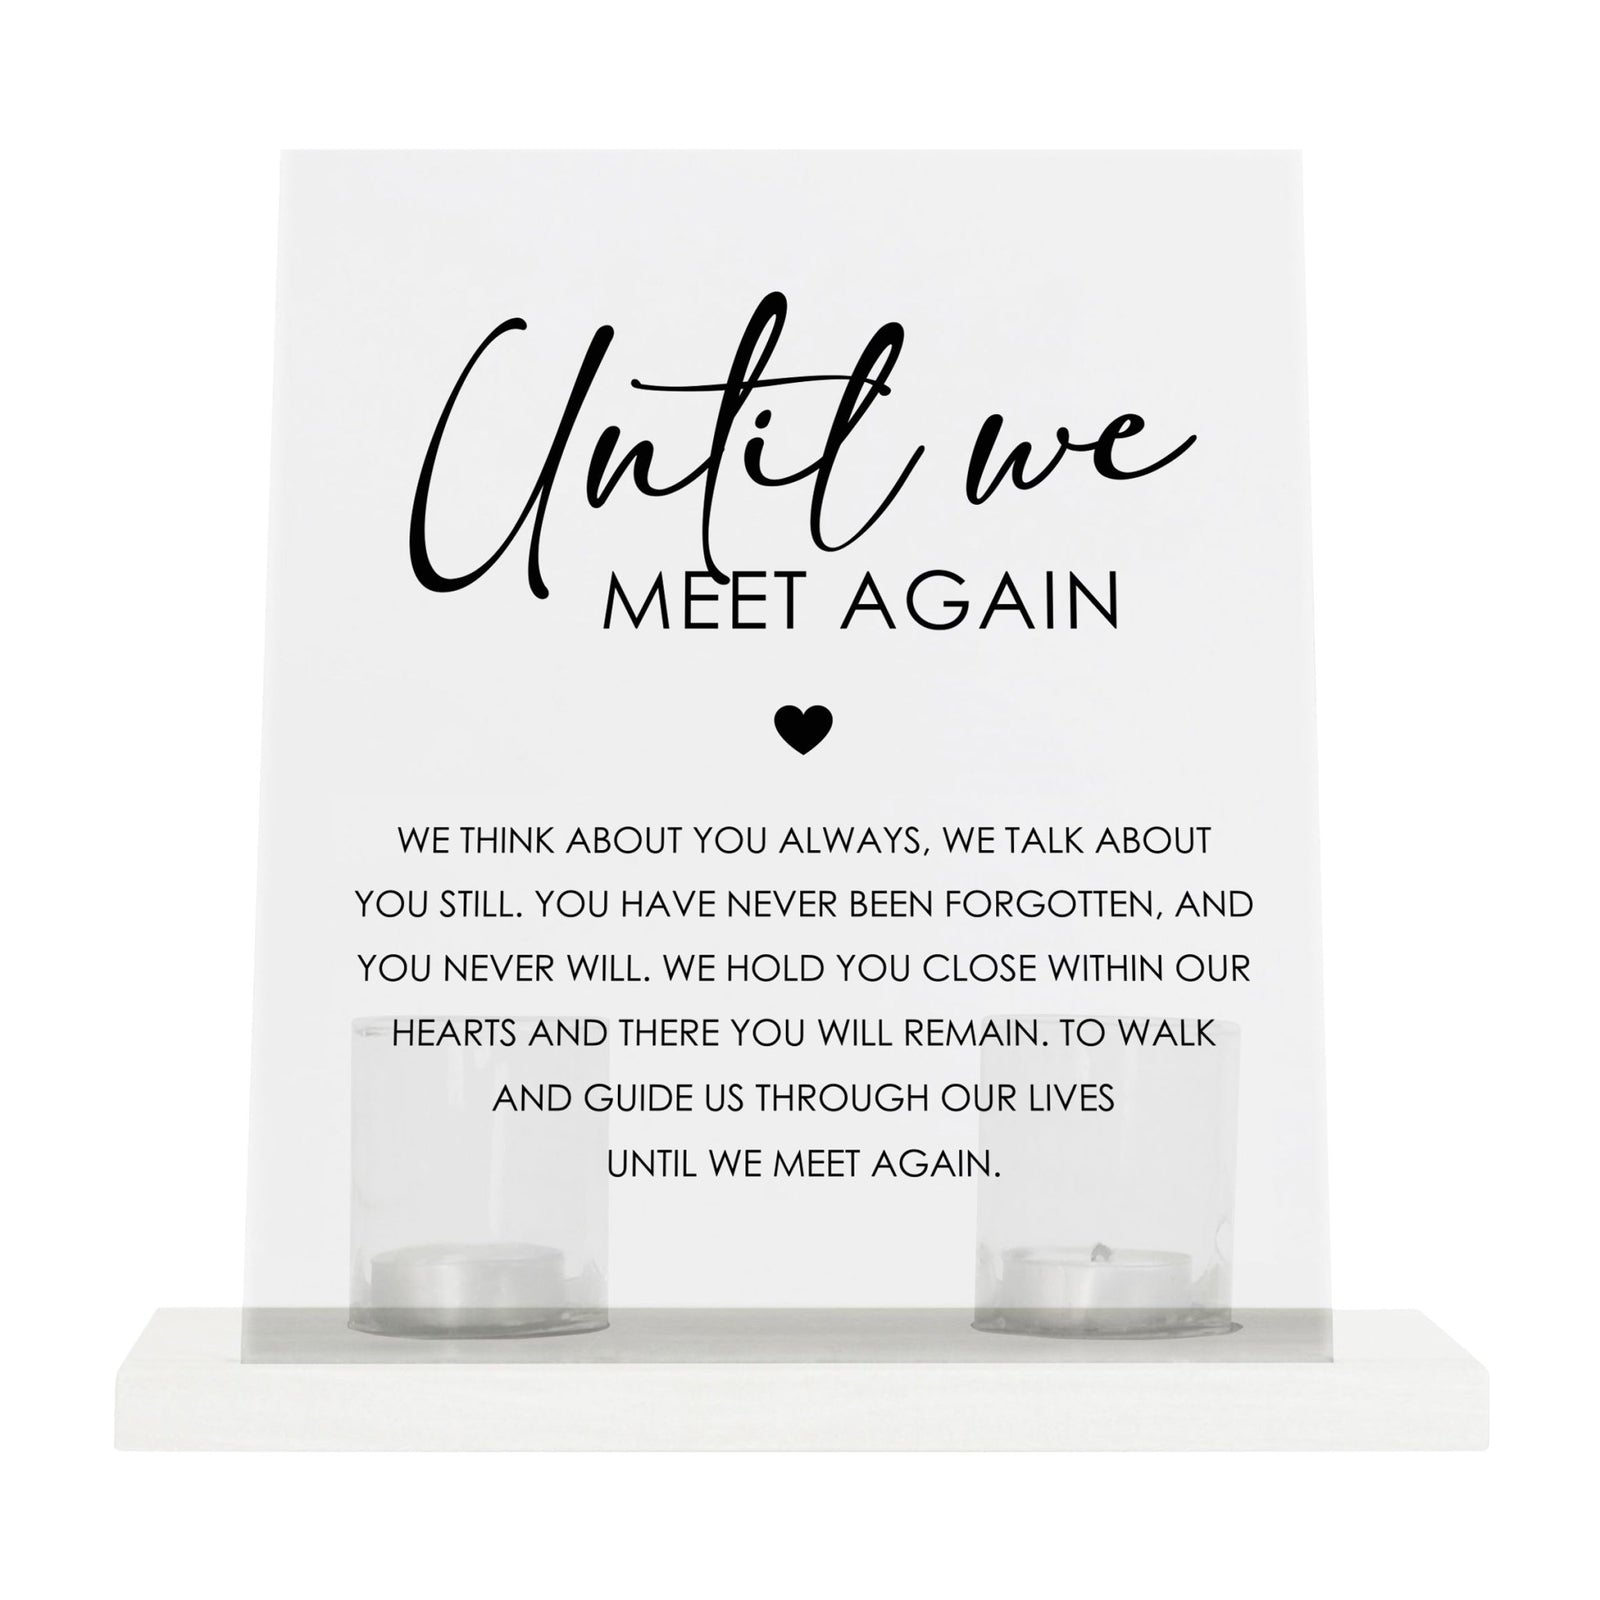 Memorial 8x10 Acrylic Wall Sign with Wooden Base Votive Candle Holder - Until We Meet Again - LifeSong Milestones